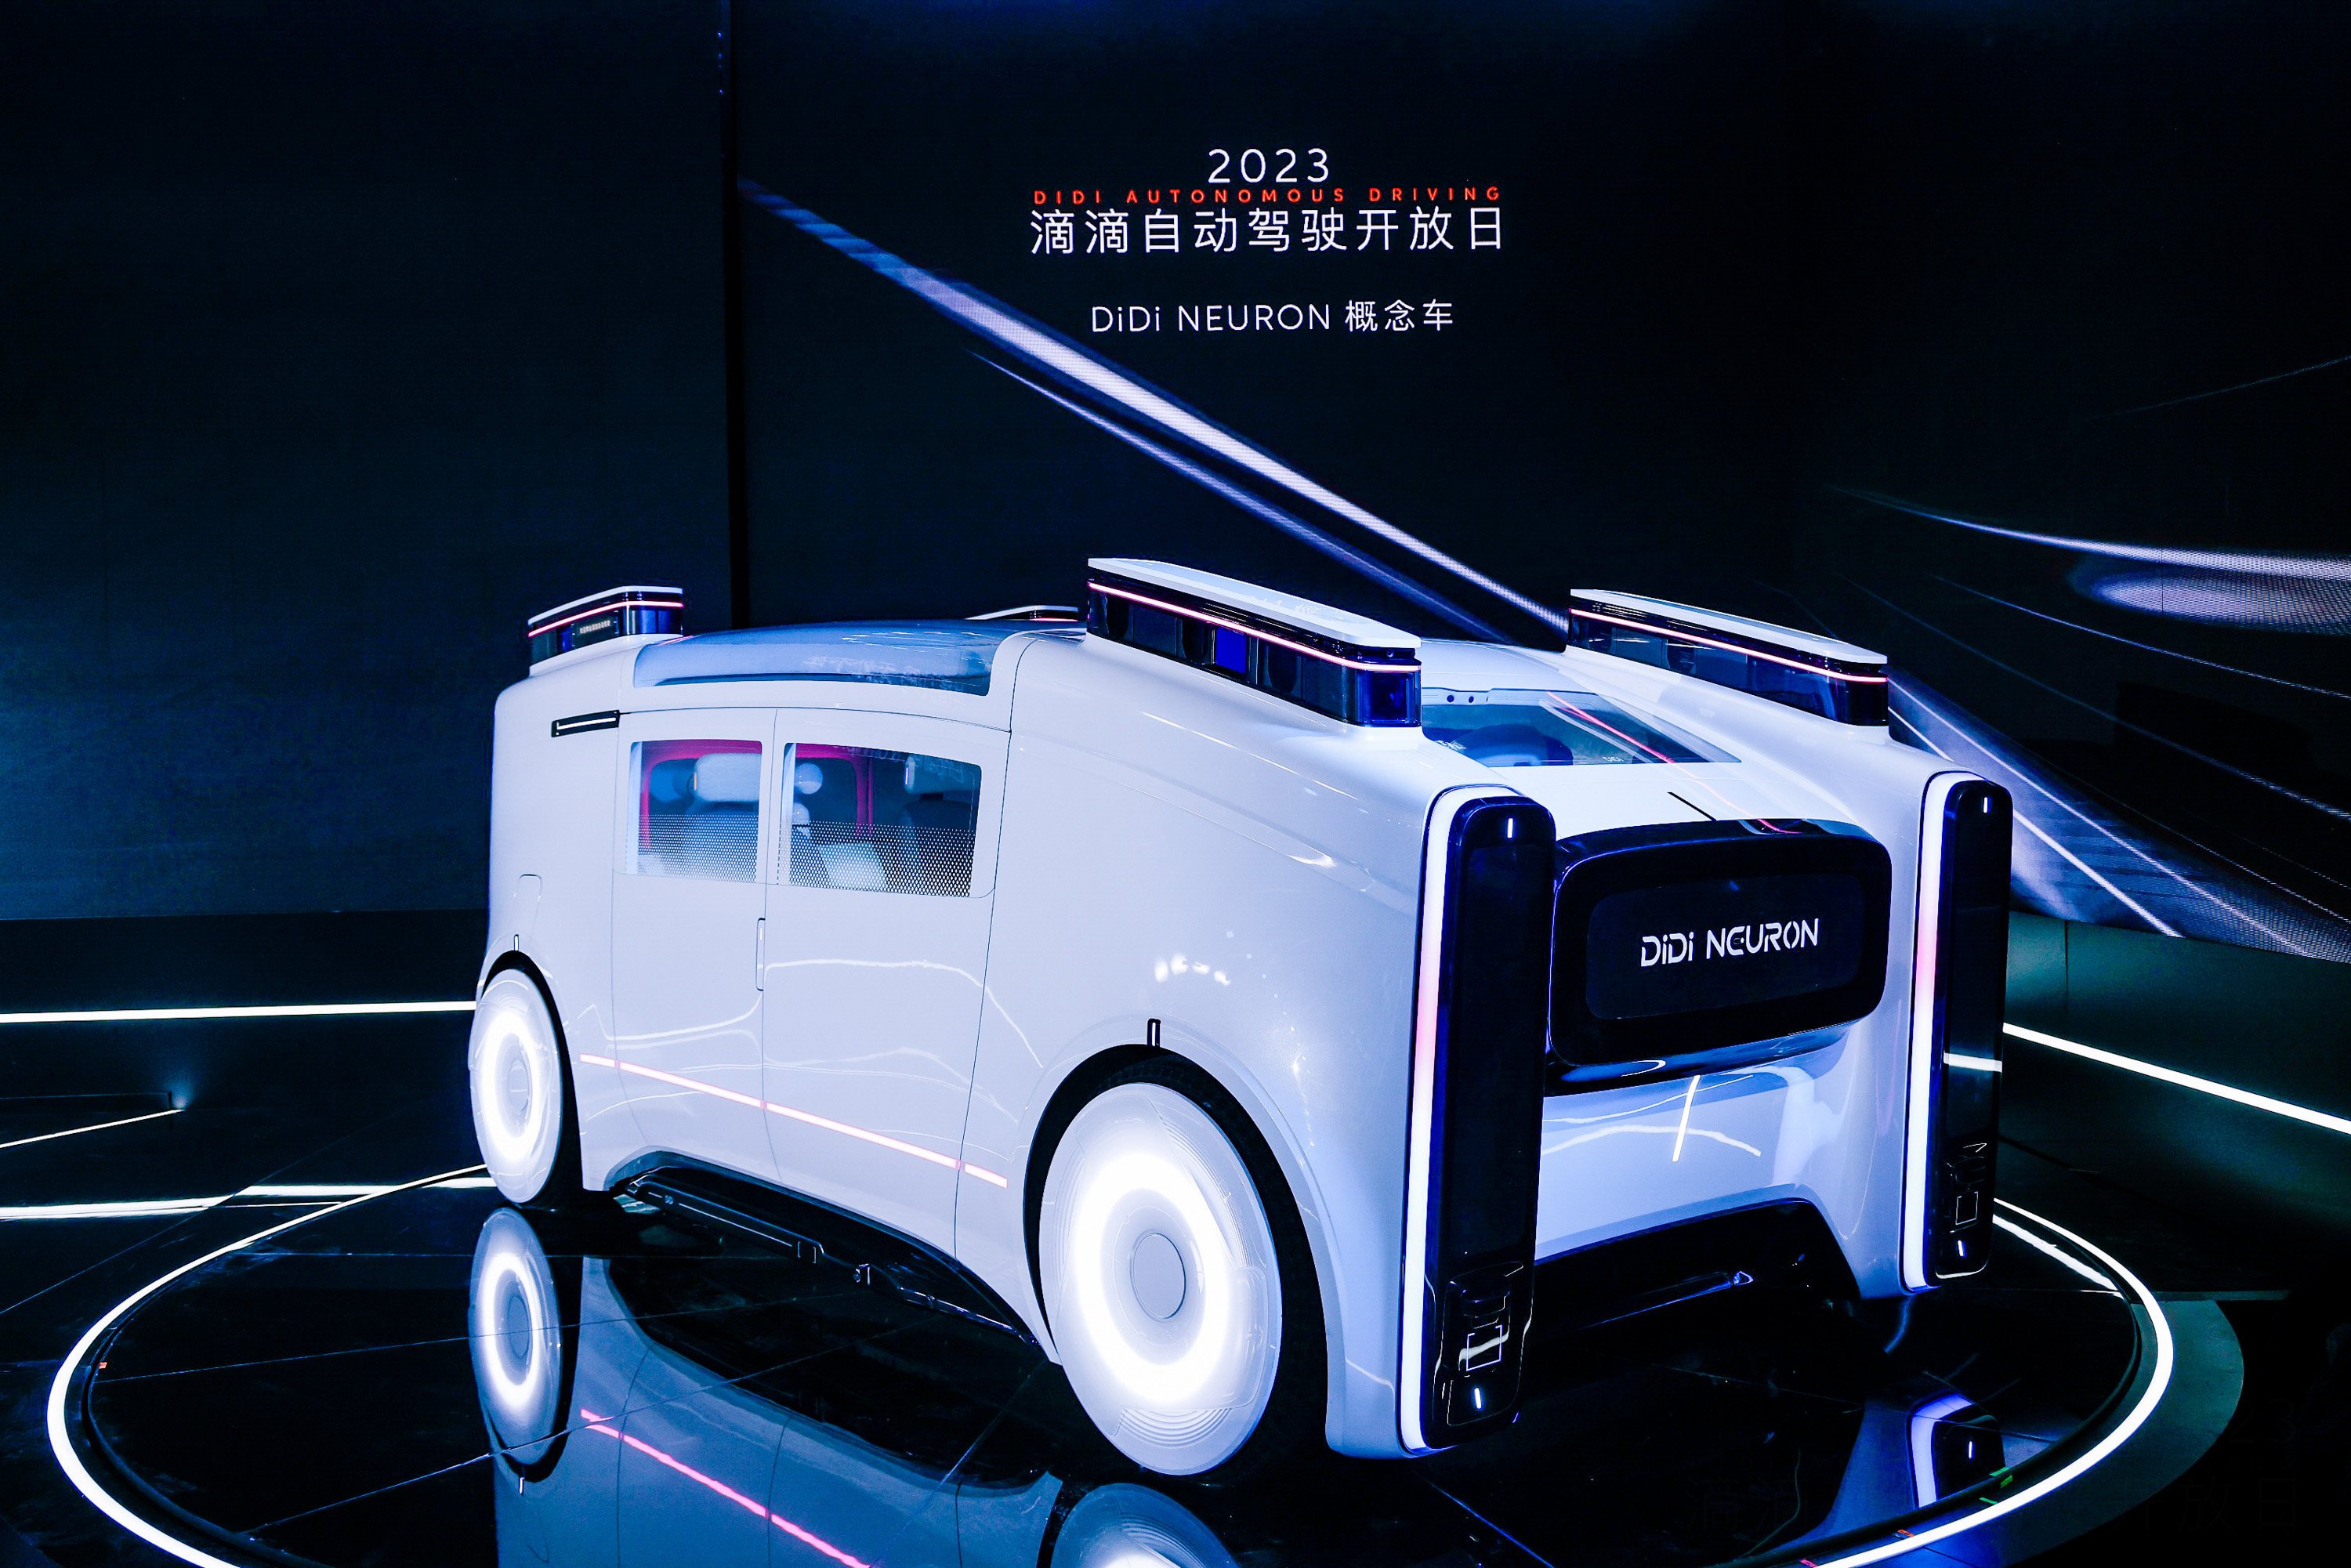 Chinese ride-hailing giant Didi Chuxing unveils its robotaxi concept car the Neuron in Shanghai, April 13, 2023. Photo: Handout